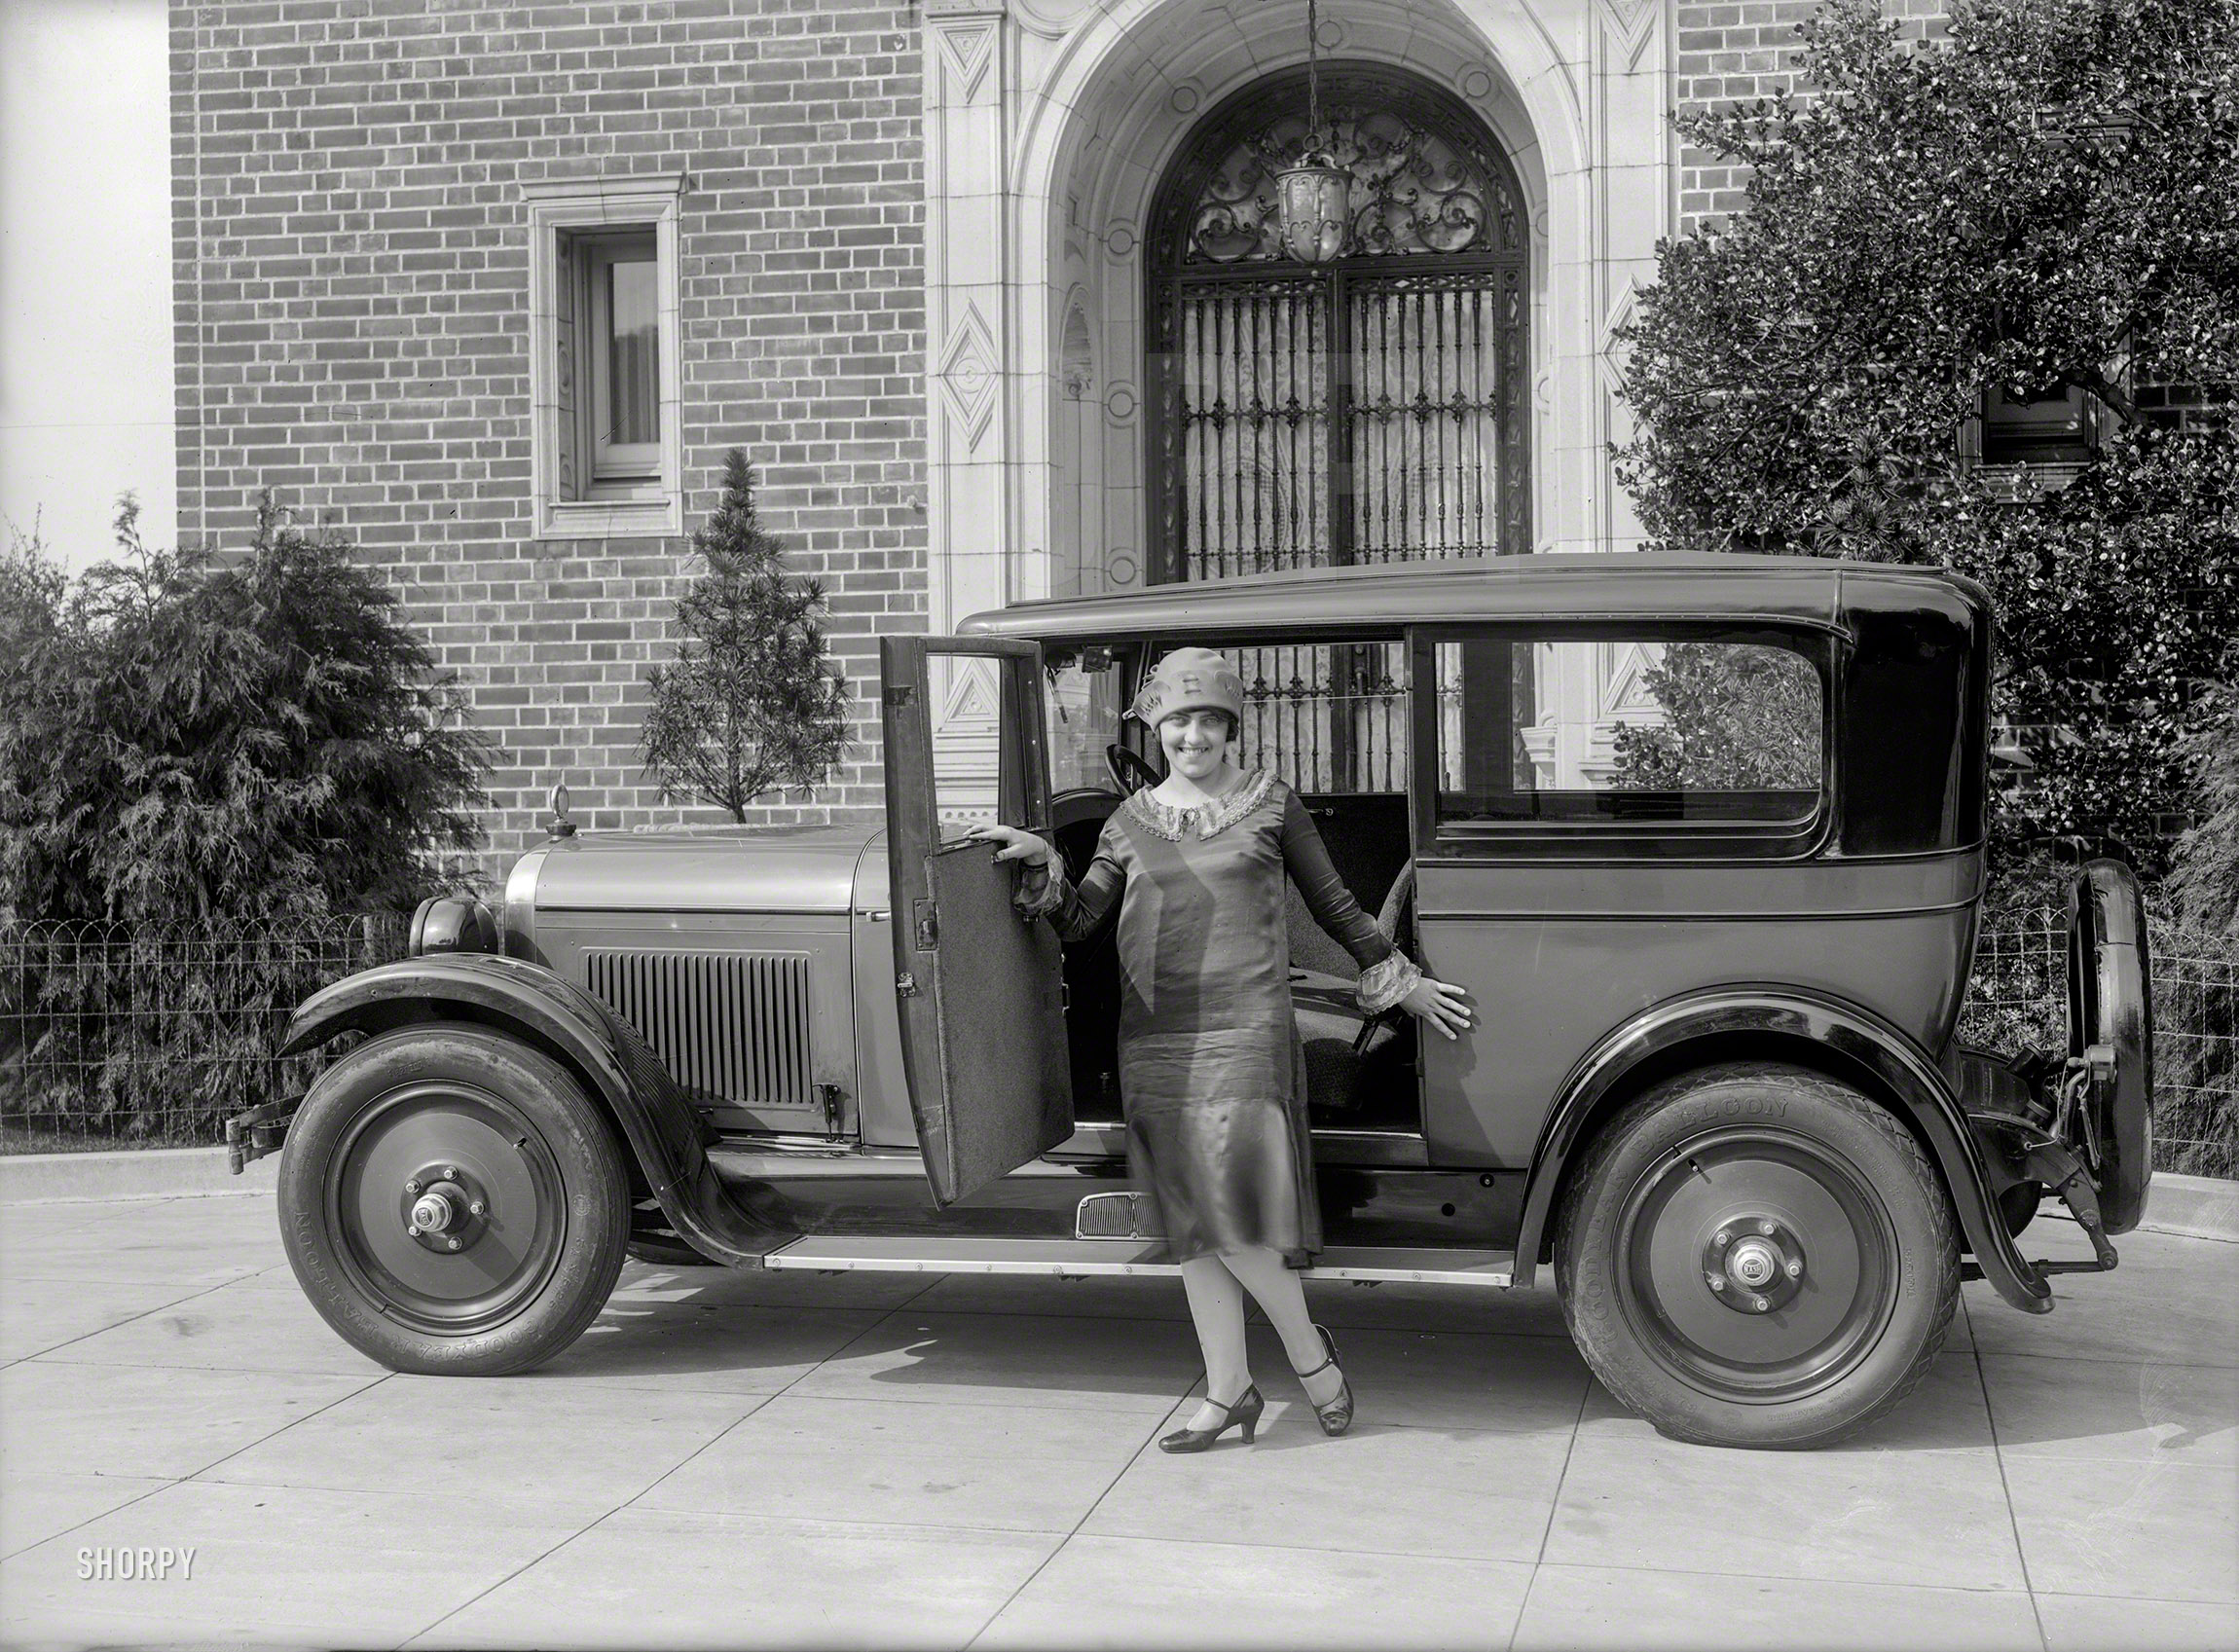 San Francisco circa 1925. "Nash Special Six two-door sedan." Equipped with "full balloon tires, five disc wheels, four-wheel brakes, Duco finish, mohair upholstery." Driver optional at extra cost. 5x7 glass negative by Chris Helin. View full size.